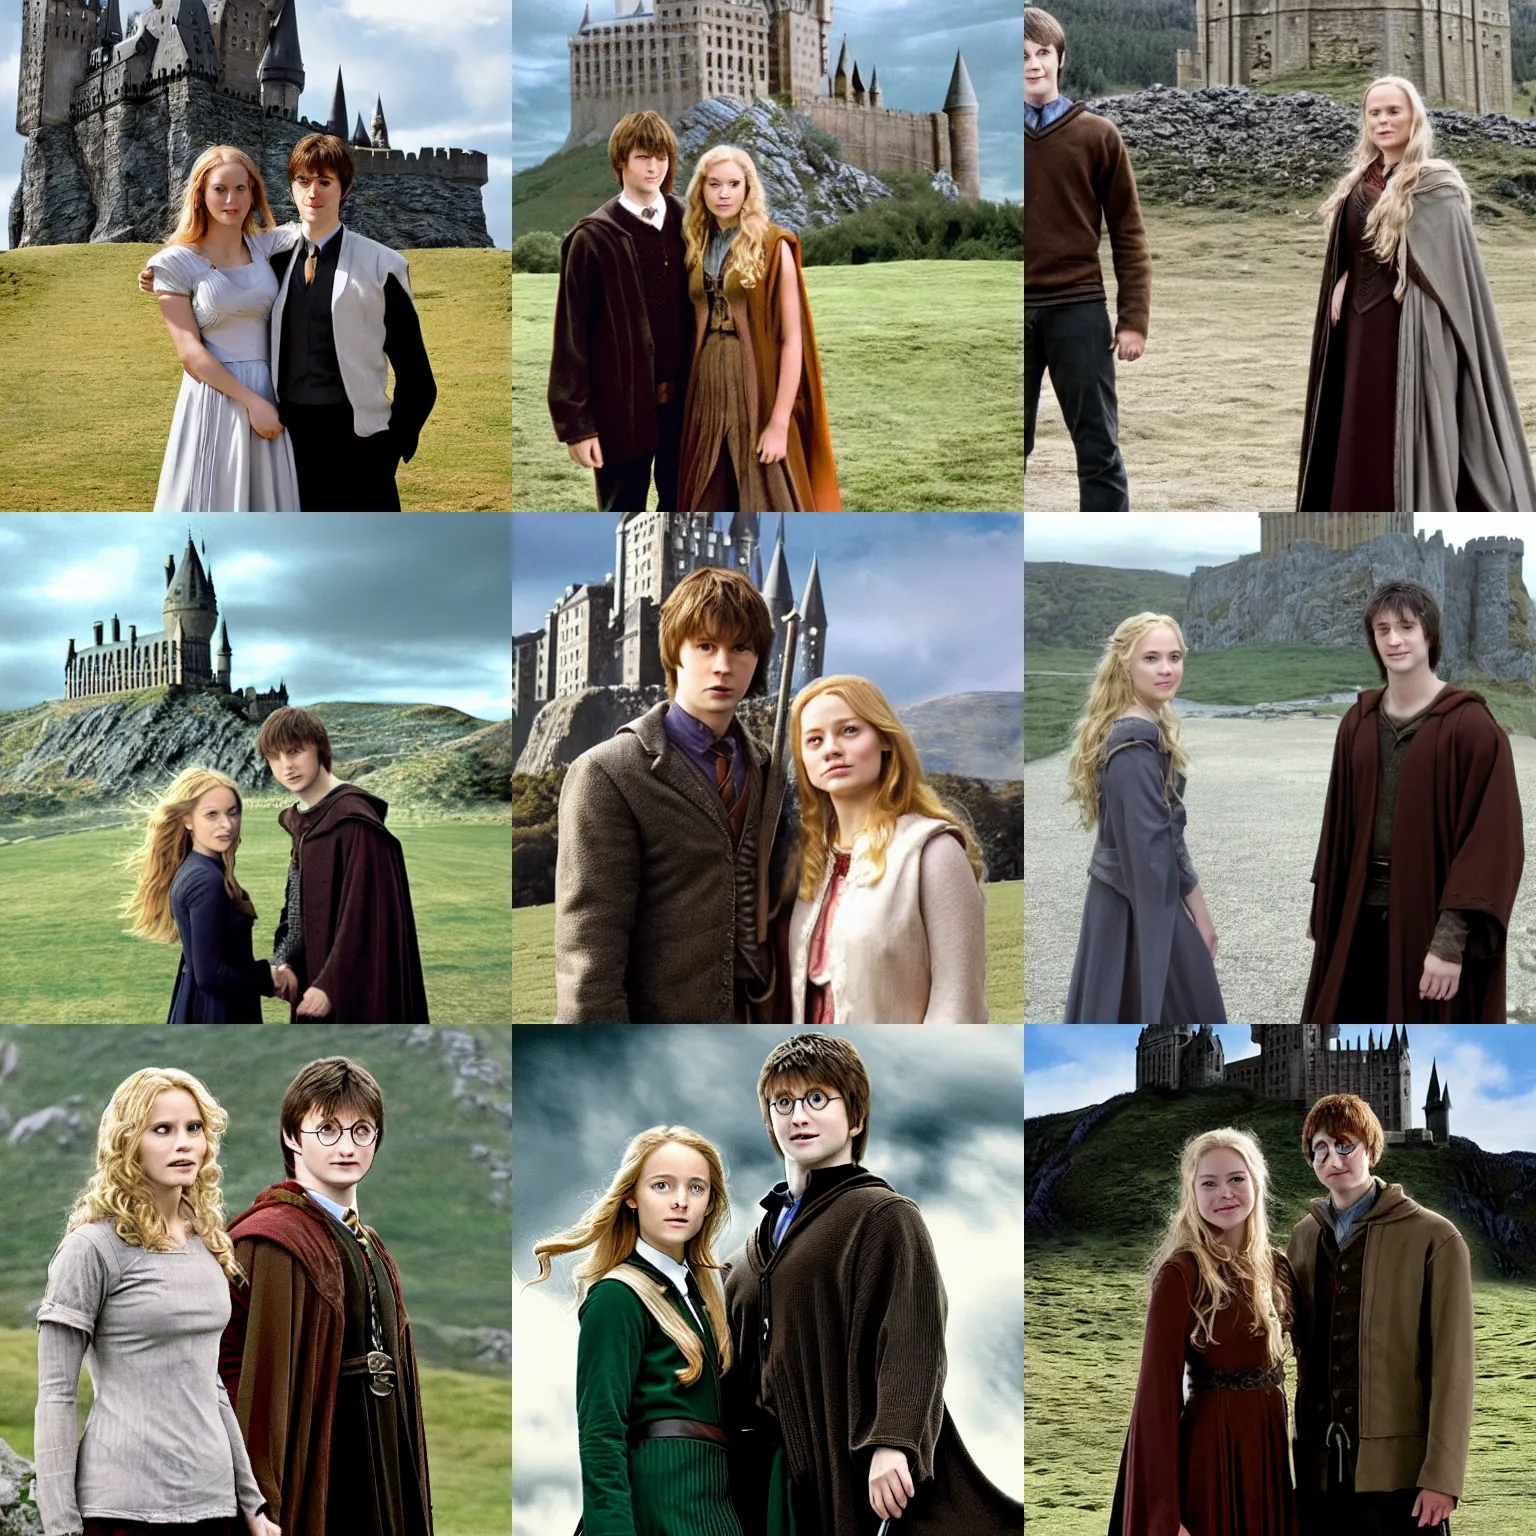 Prompt: eowyn and harry potter stand together in front of a castle